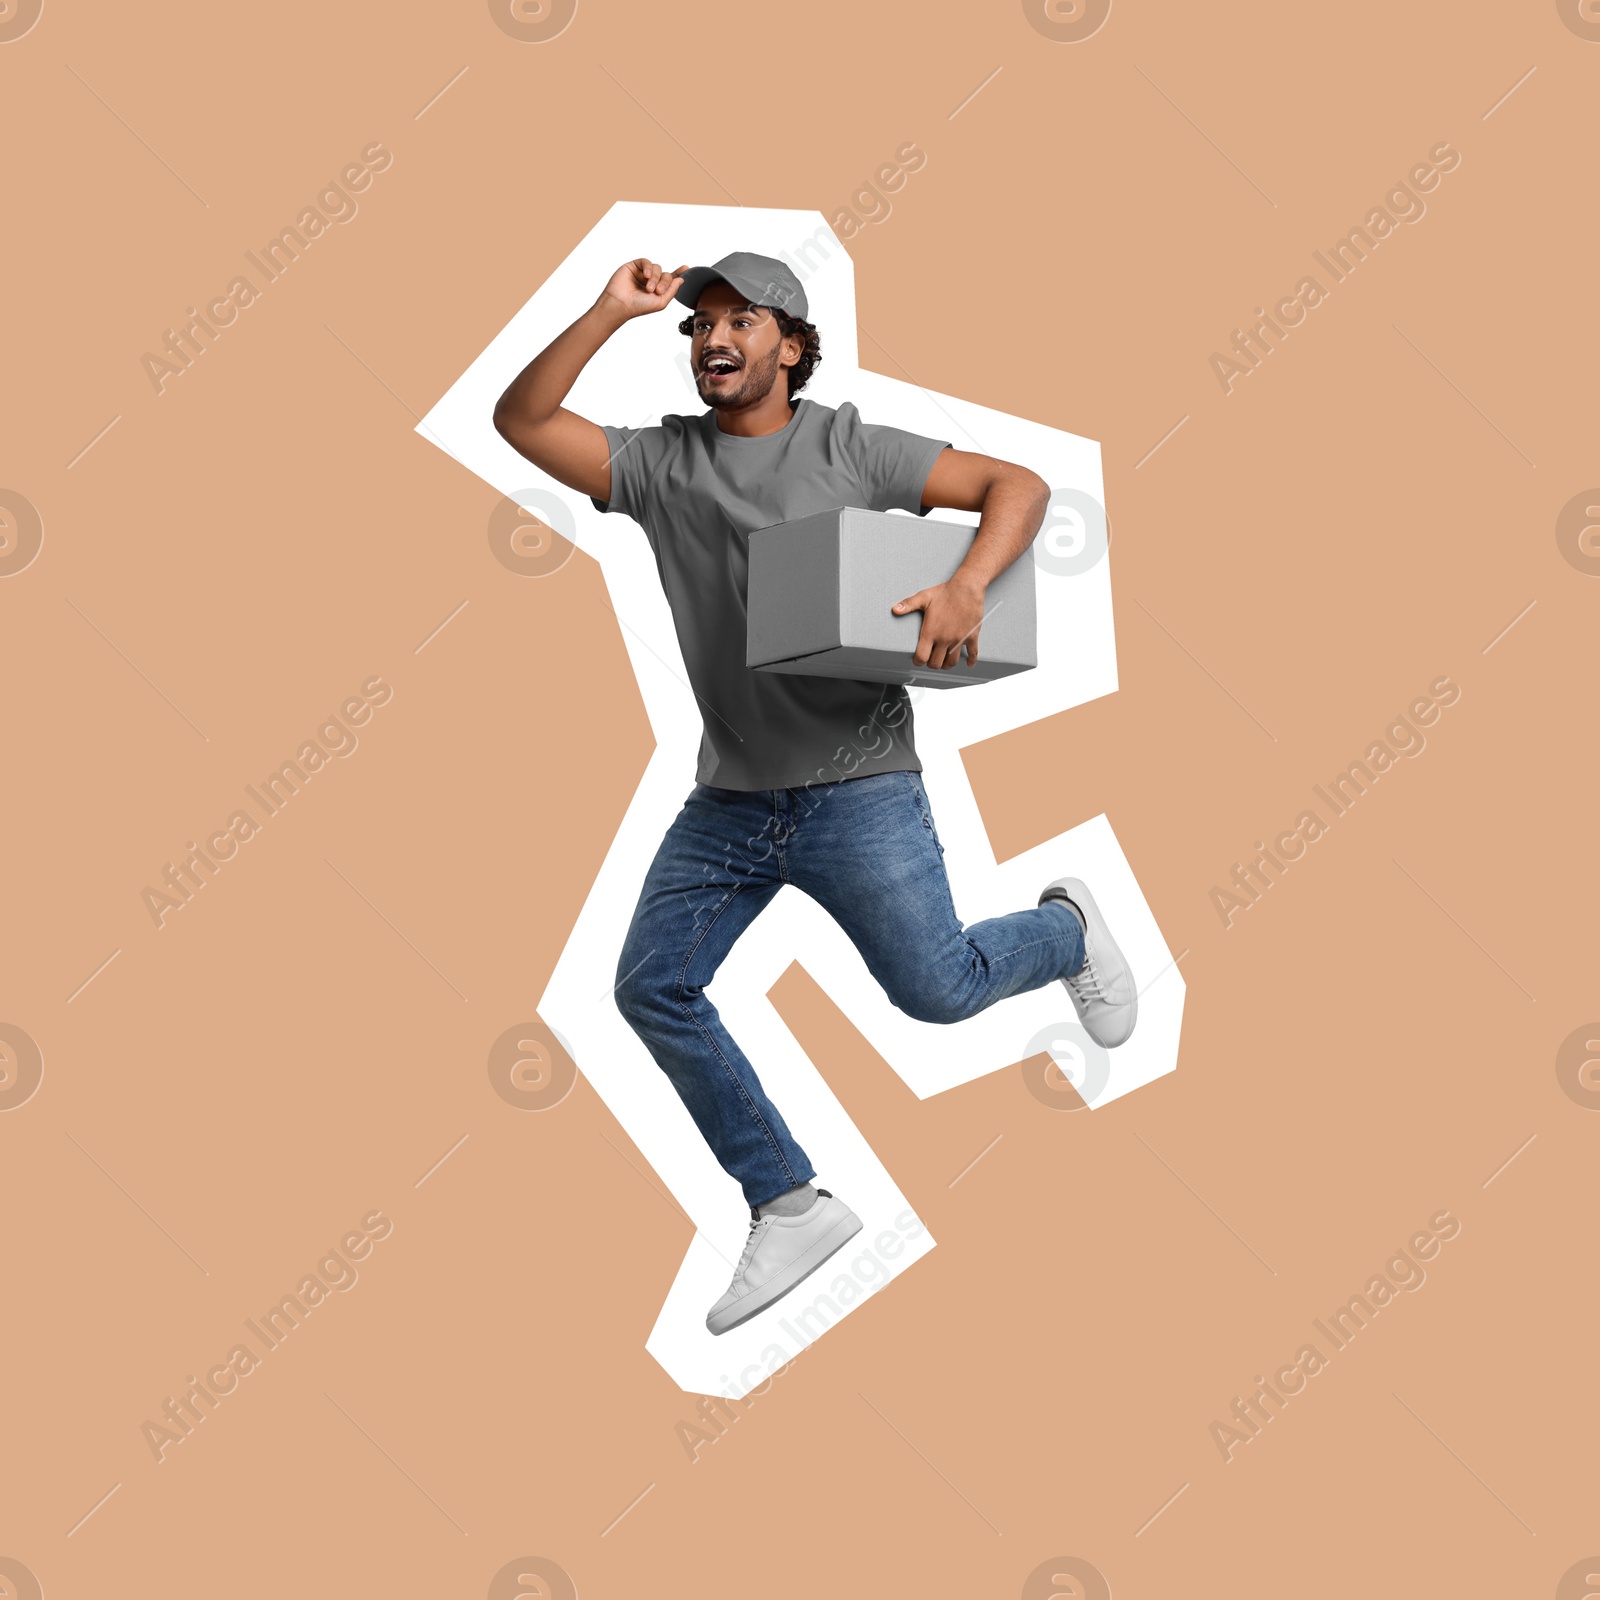 Image of Surprised courier with parcel jumping on beige background